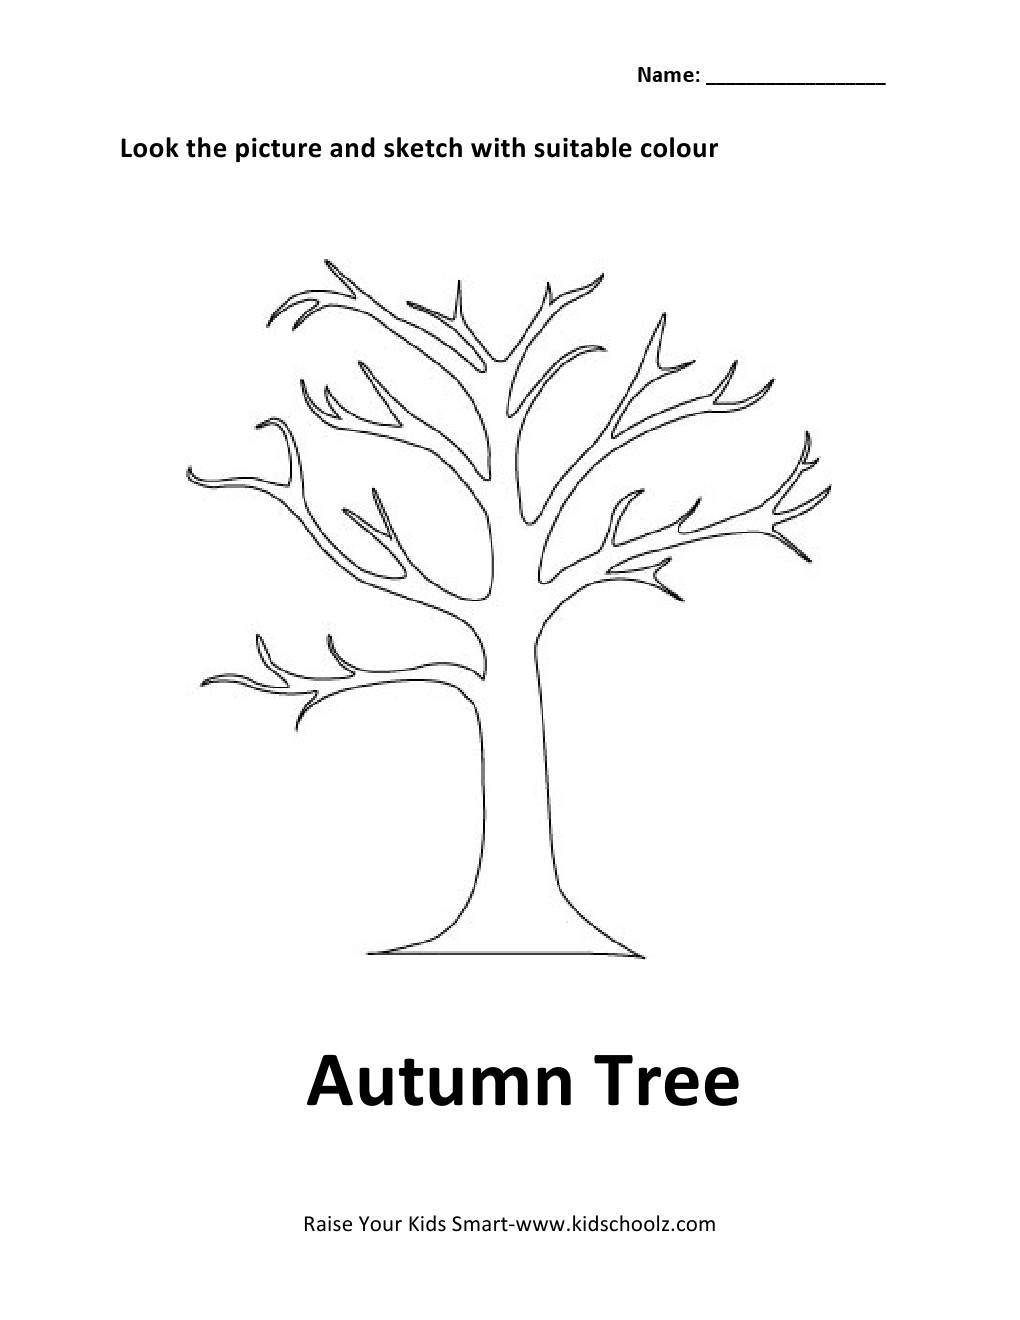 13 Best Images of Fall Kindergarten Vocabulary Worksheets - Playground